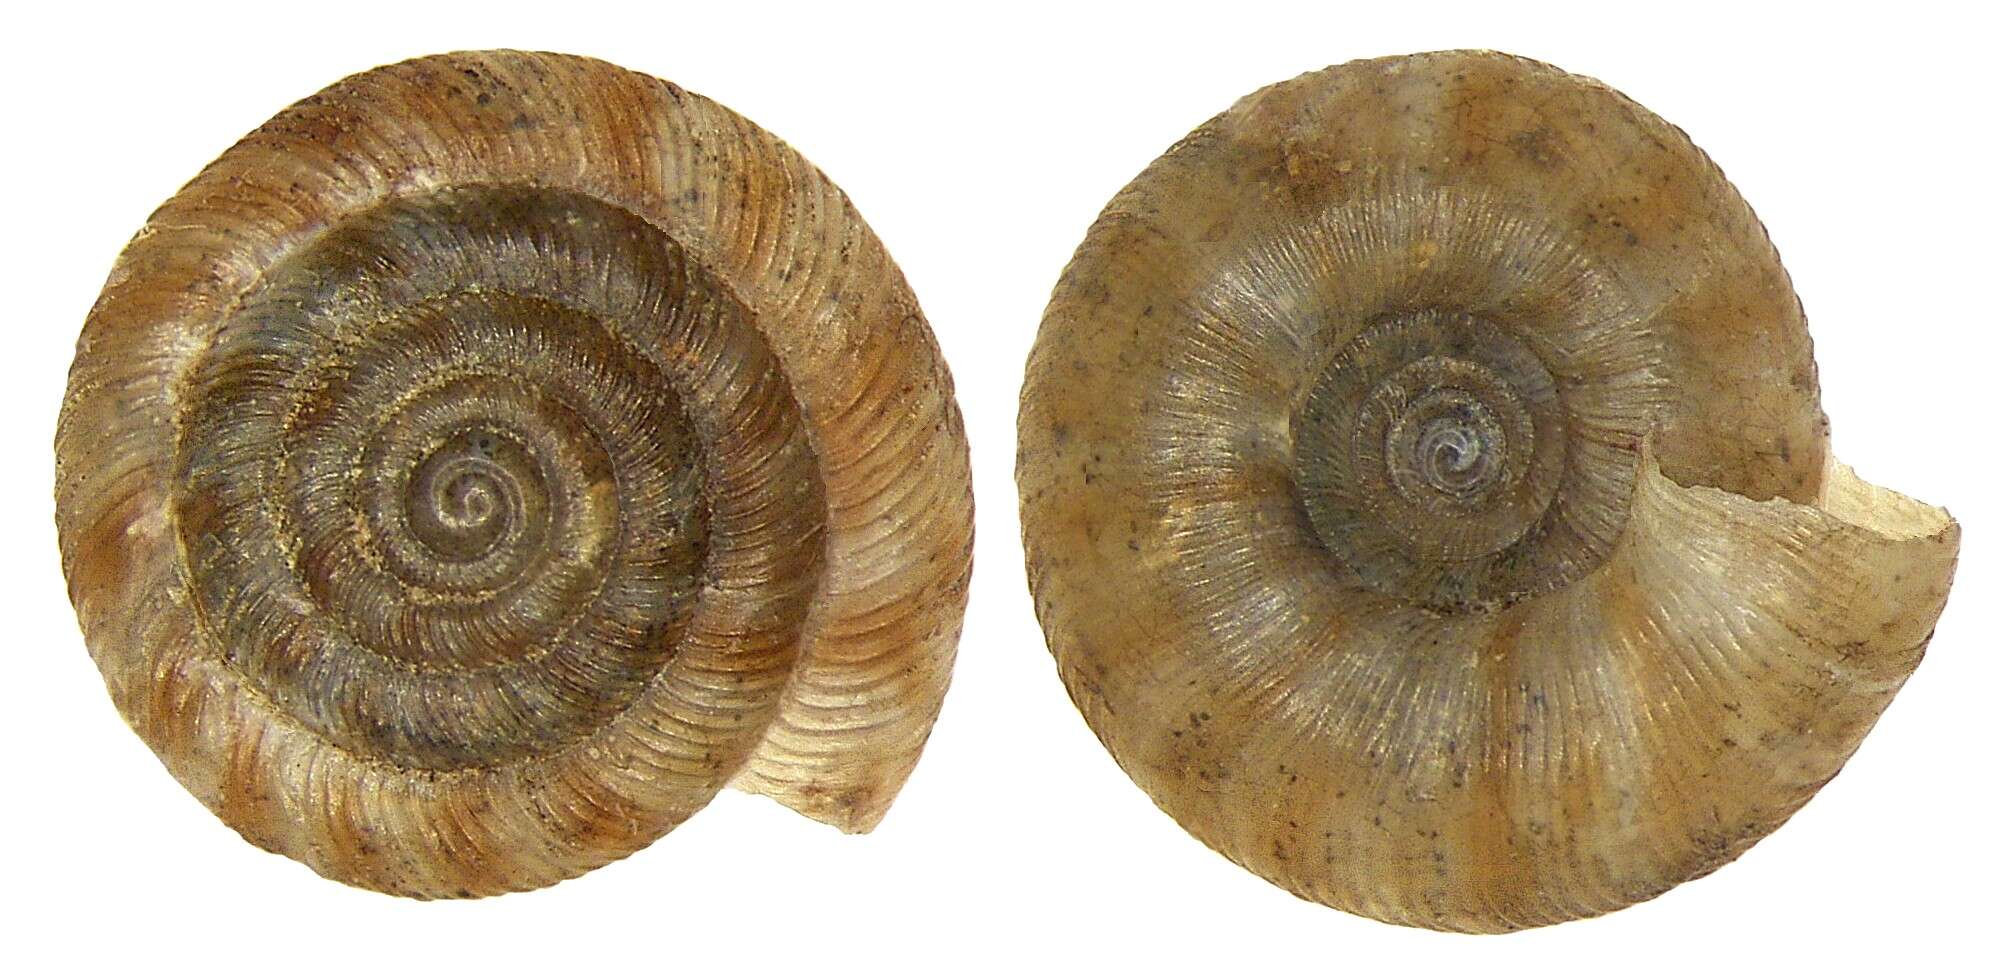 Image of disk snail